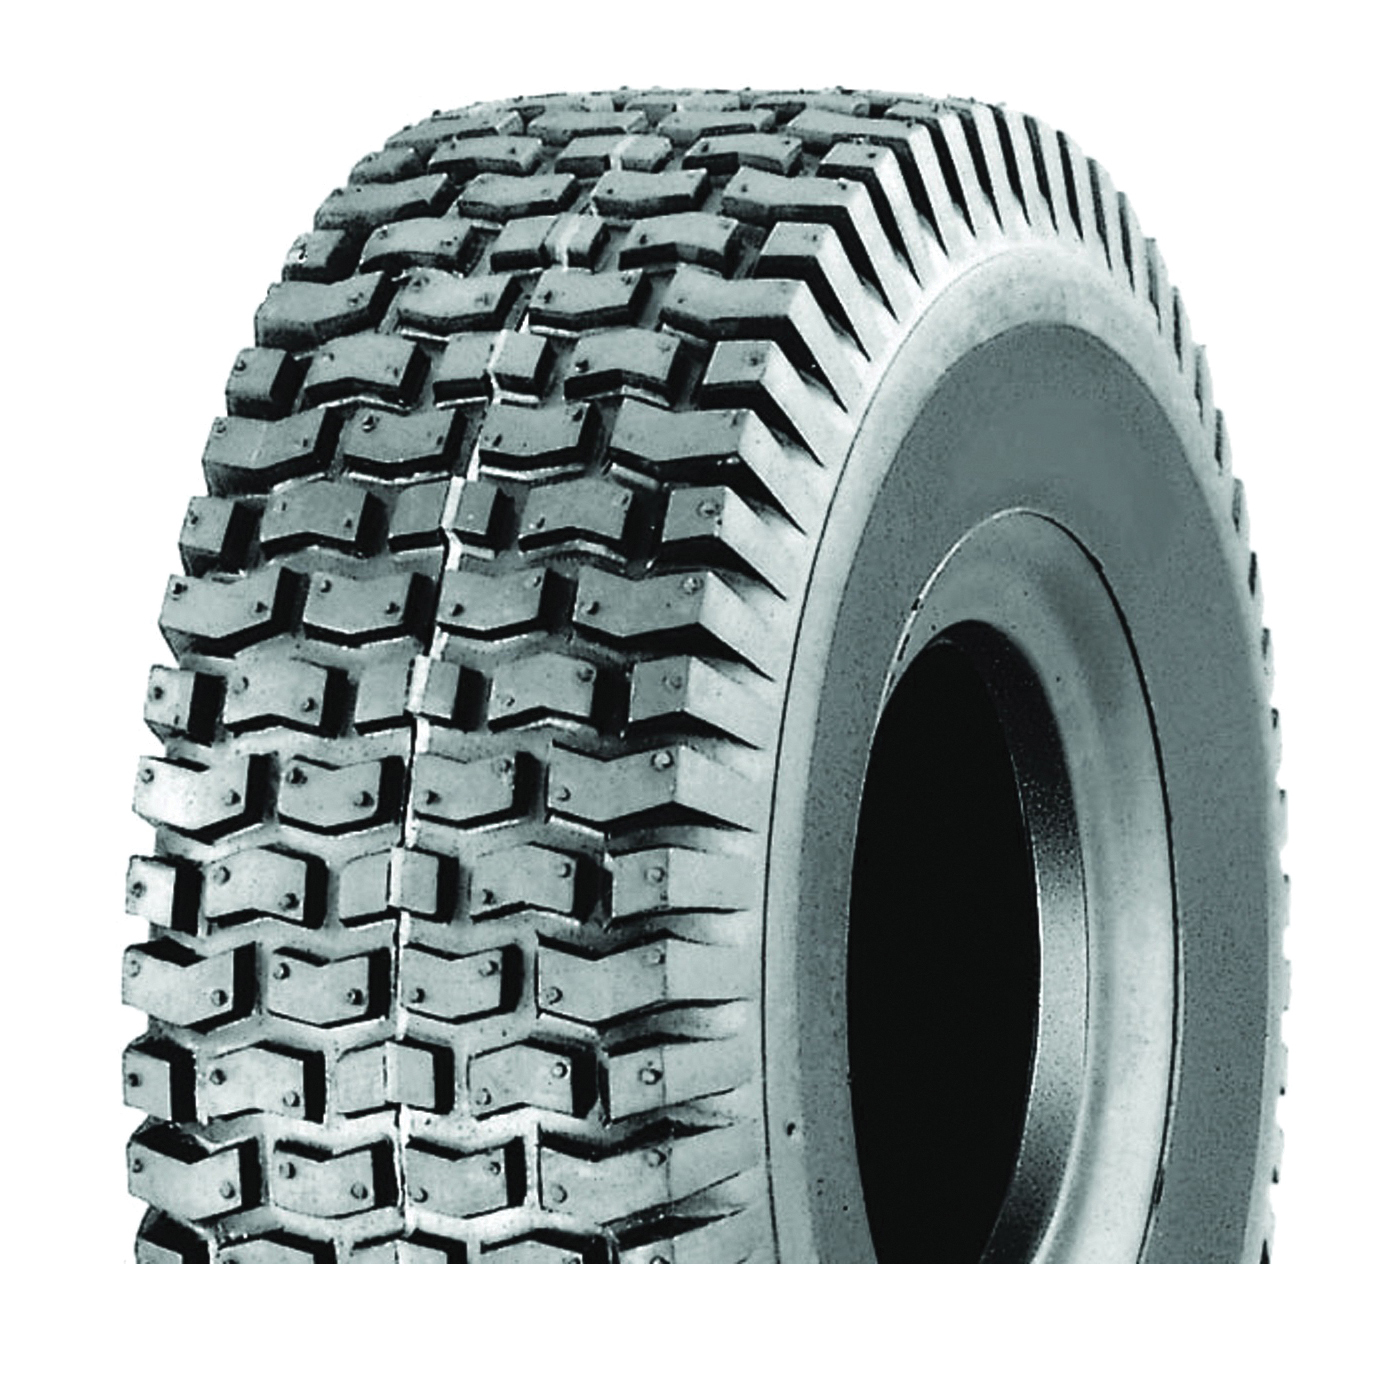 506-2TR-I Turf Rider Tire, Tubeless, For: 6 x 3-1/4 in Rim Lawnmowers and Tractors